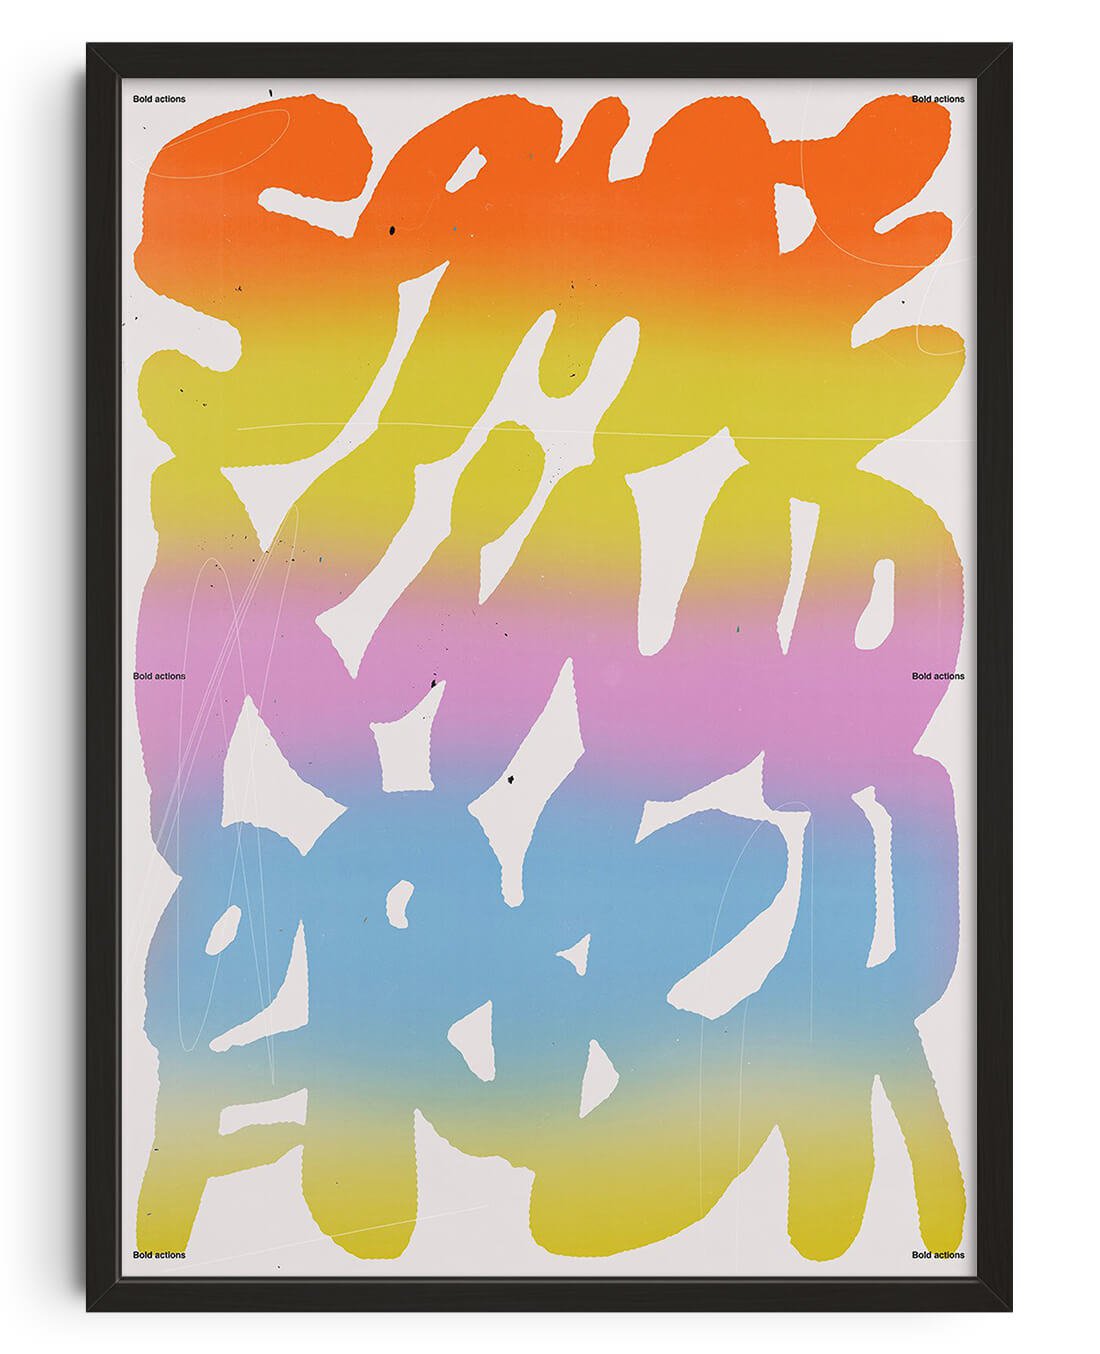 Bold Actions by Jorge Santos contemporary wall art print from DROOL